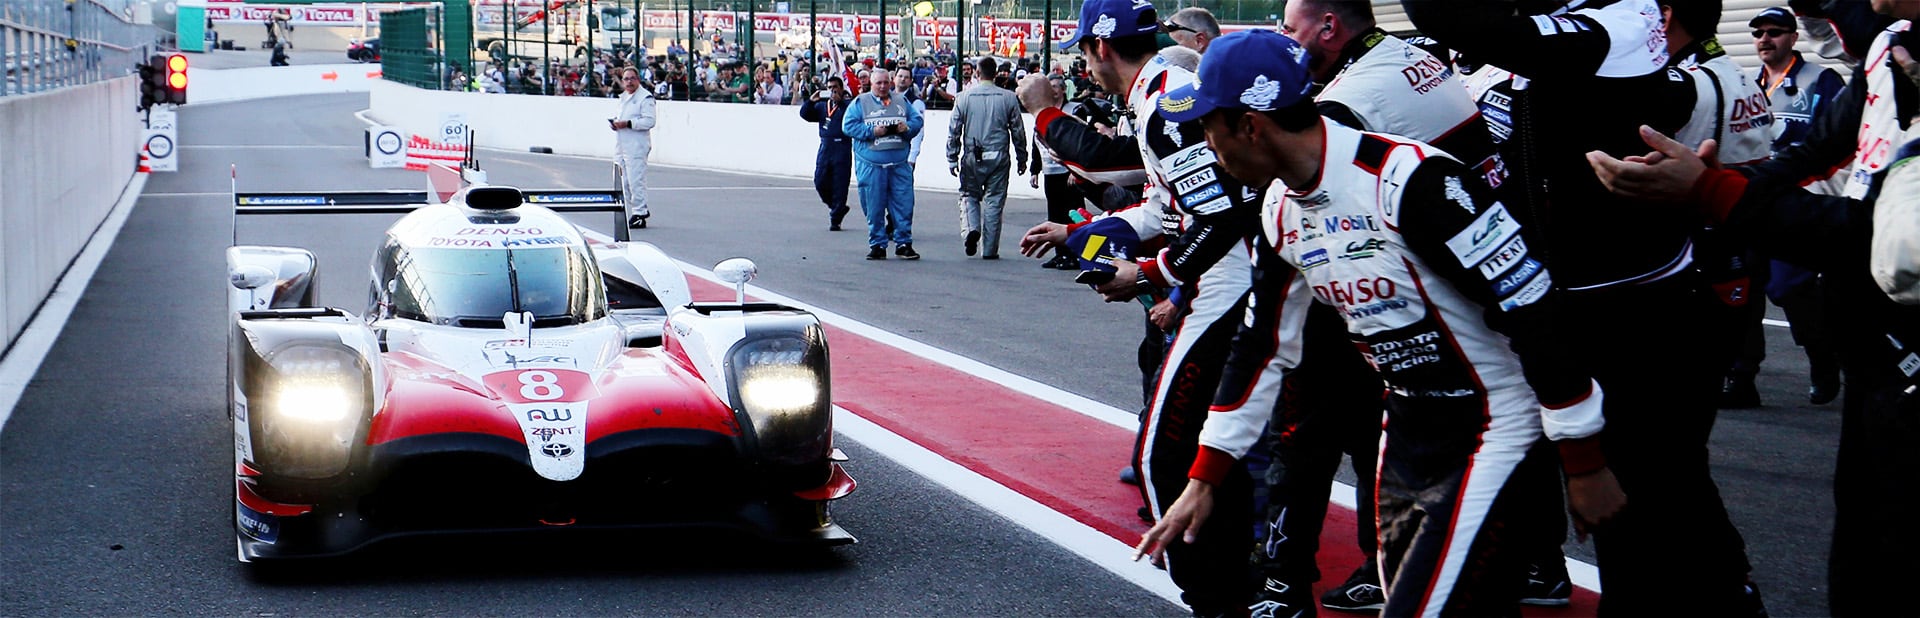 One-Two Victory at Spa for TOYOTA GAZOO Racing